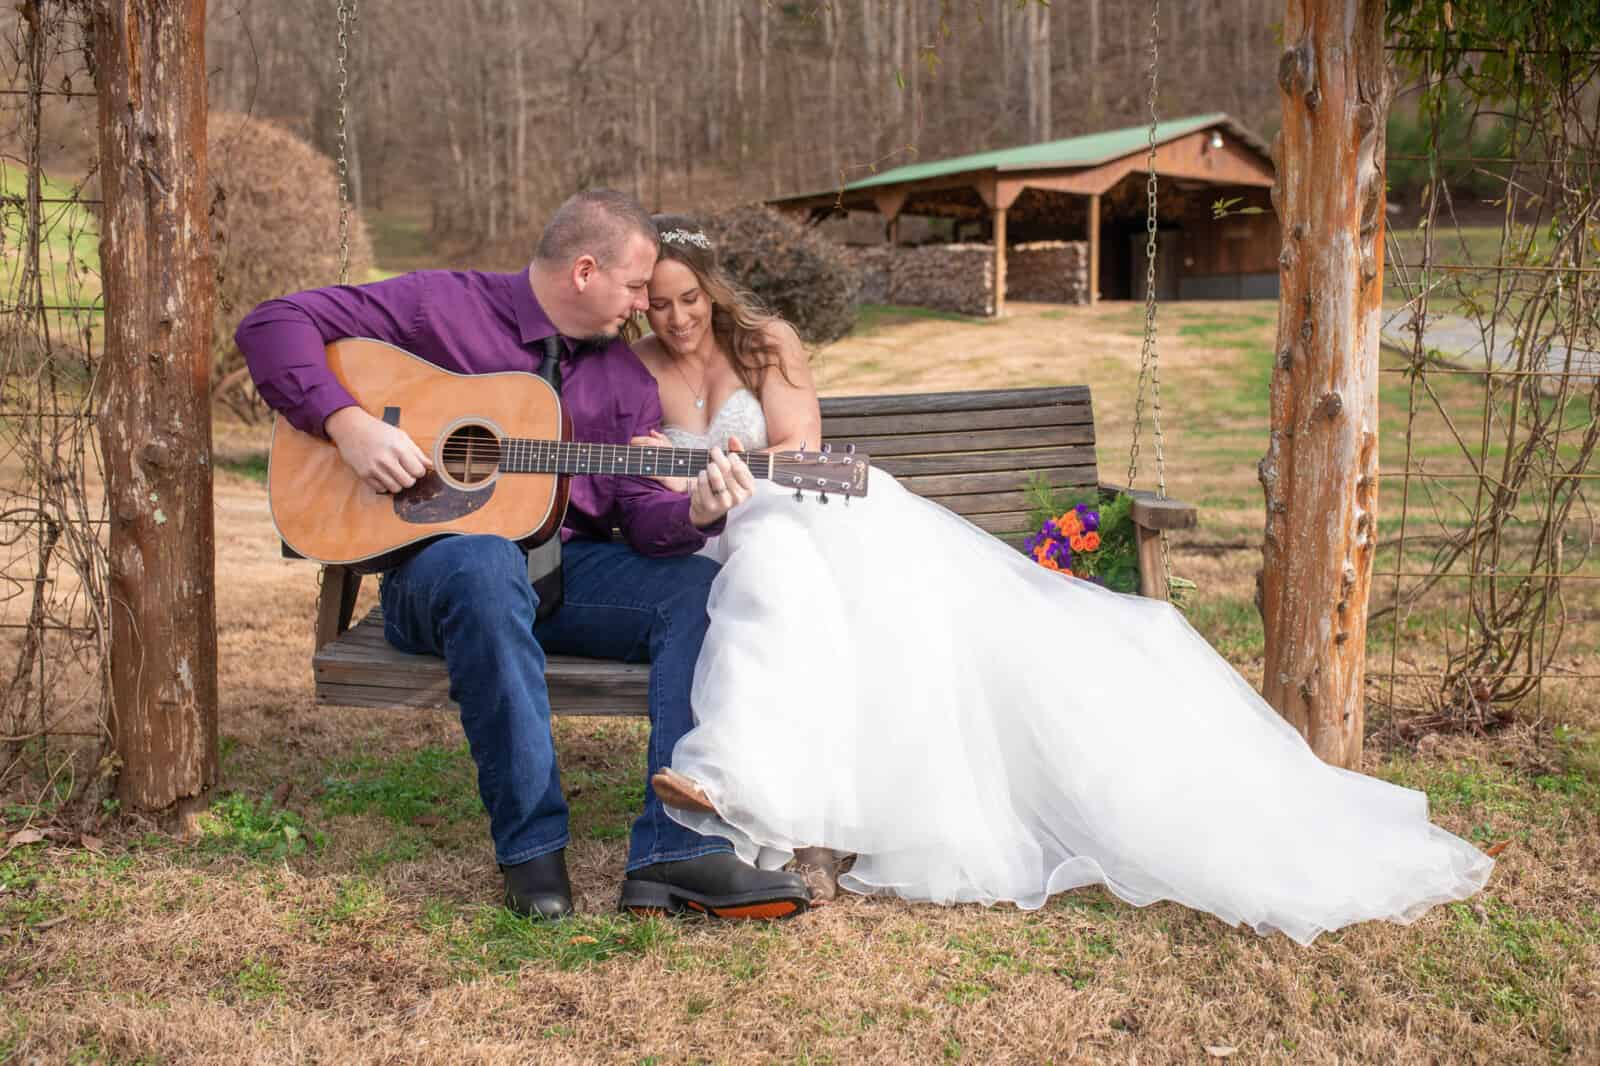 Elopement groom with purple shirt sings and plays acoustic guitar to bride in long flowing wedding gown sitting on swing near barn.